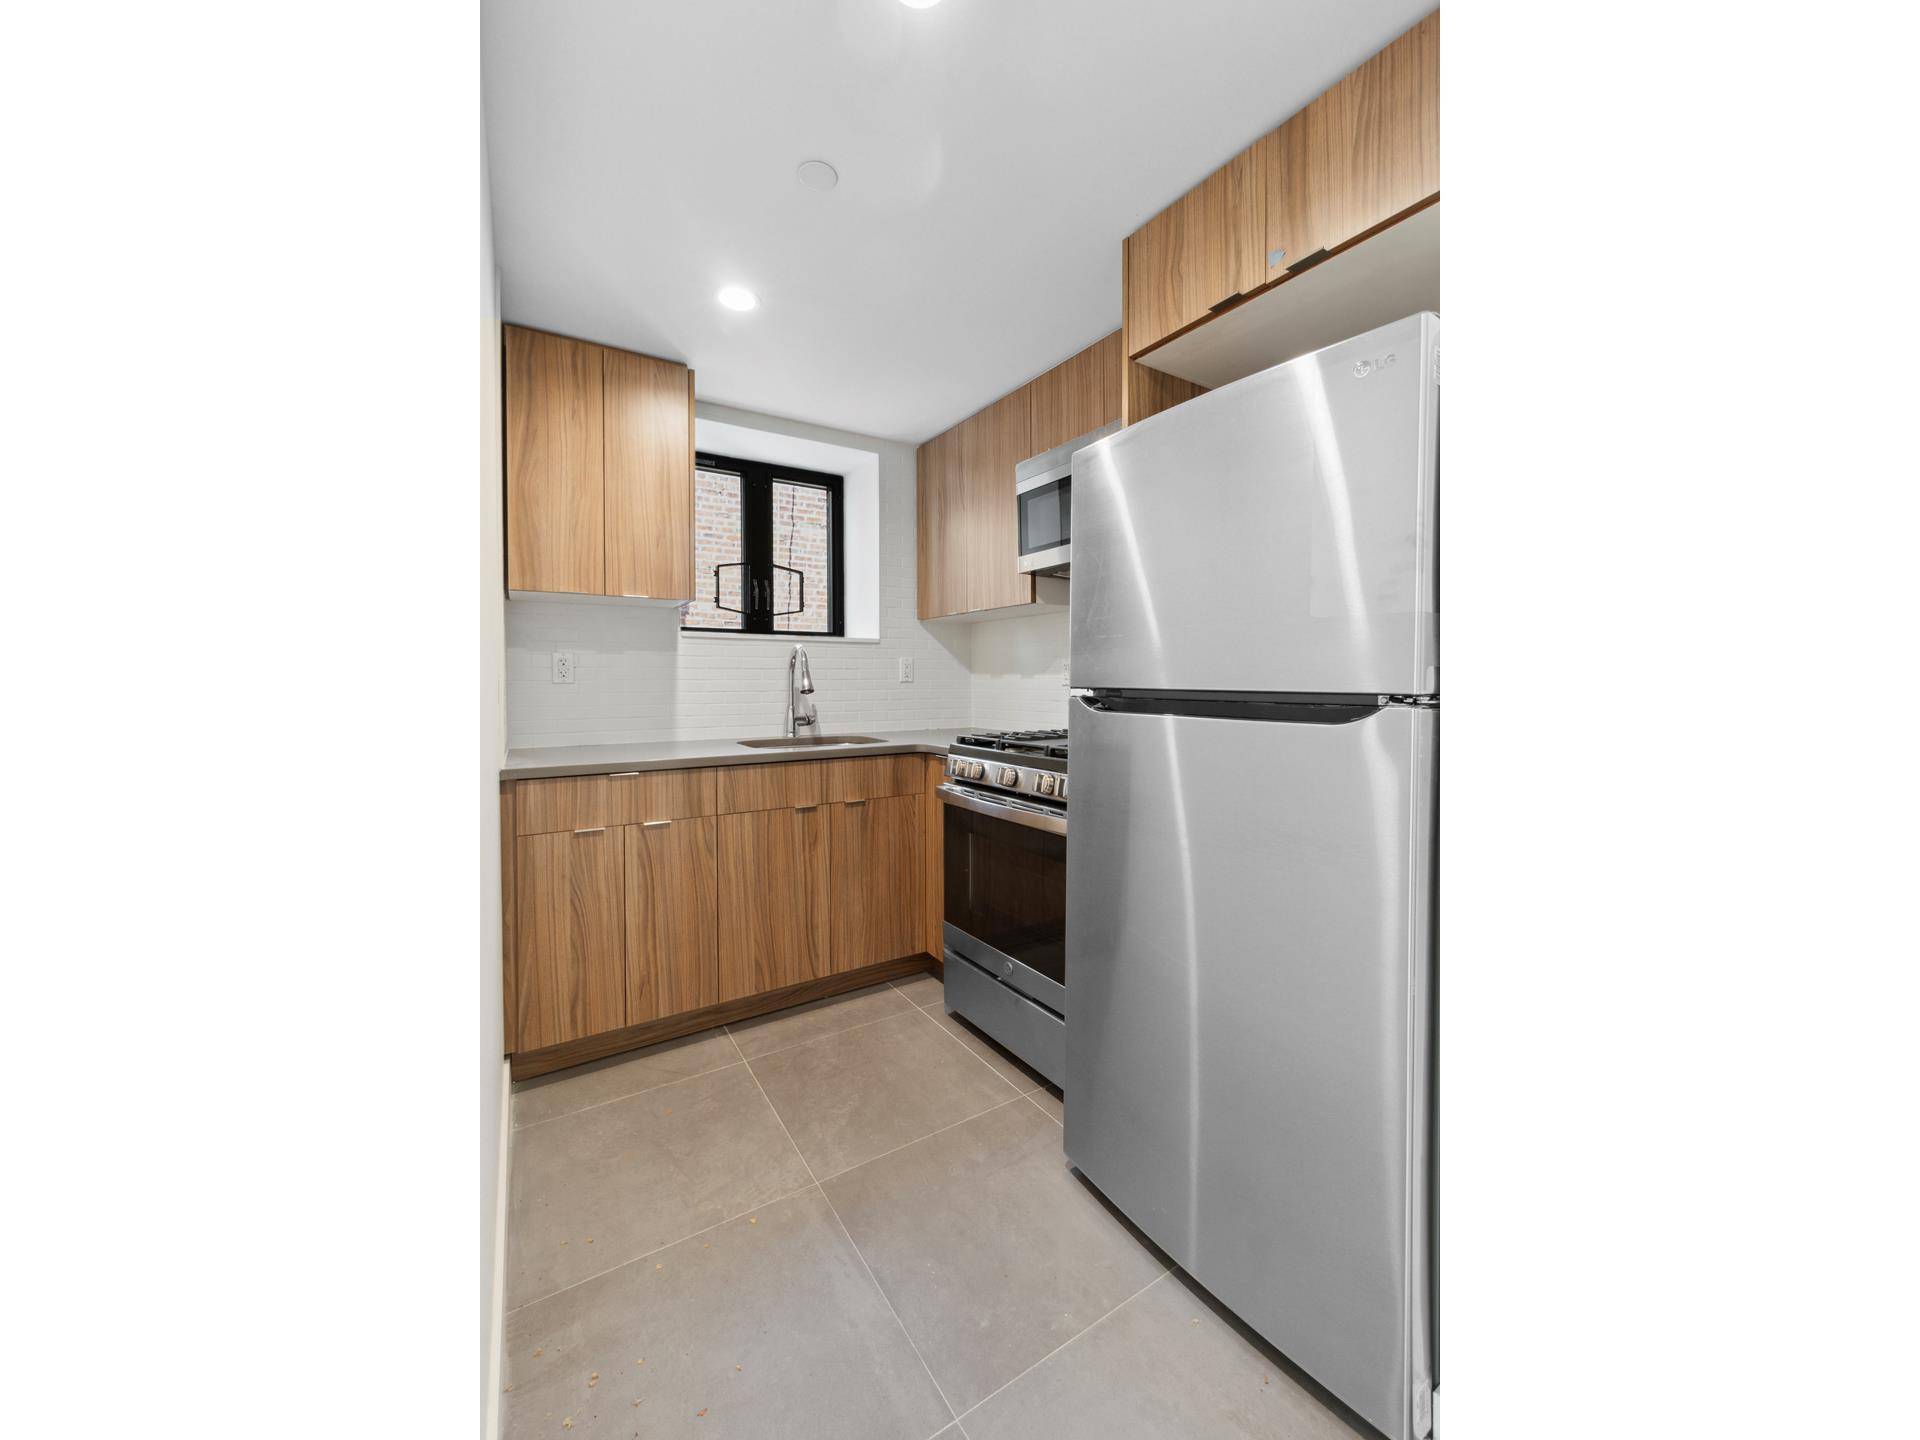 Welcome to your new home in a state of the art condominium nestled in the heart of Flatlands, Brooklyn.